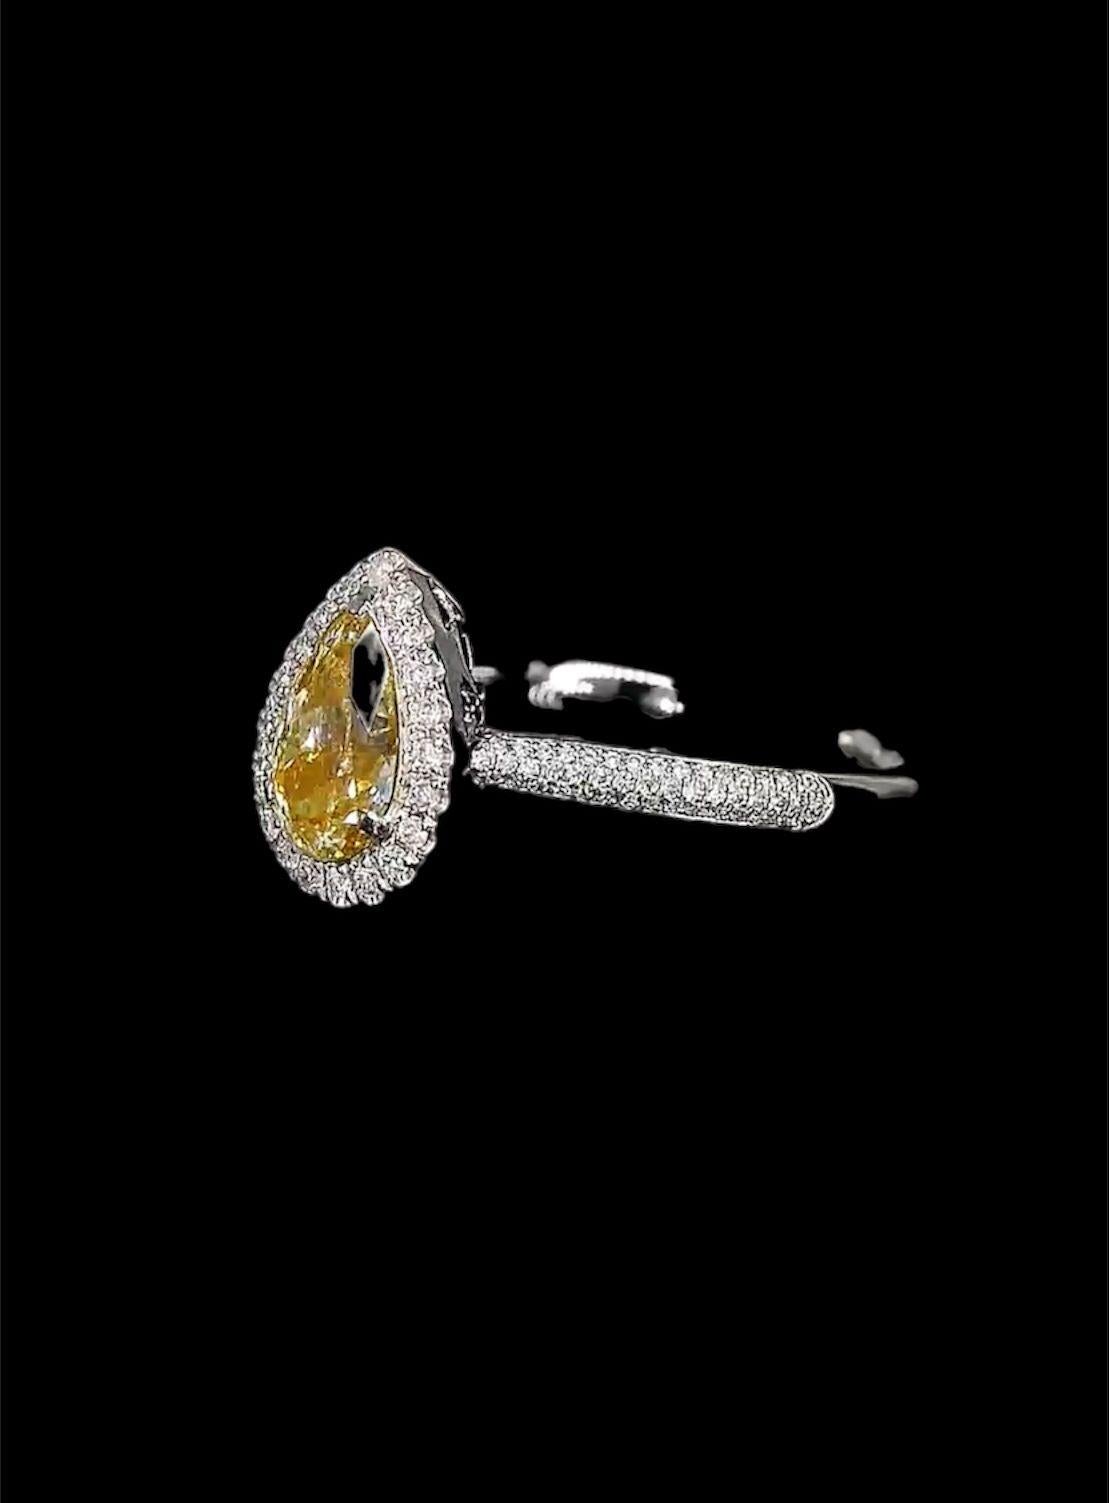 AGL Certified 1.01 Carat Fancy Yellow Diamond Ring VS Clarity For Sale 4